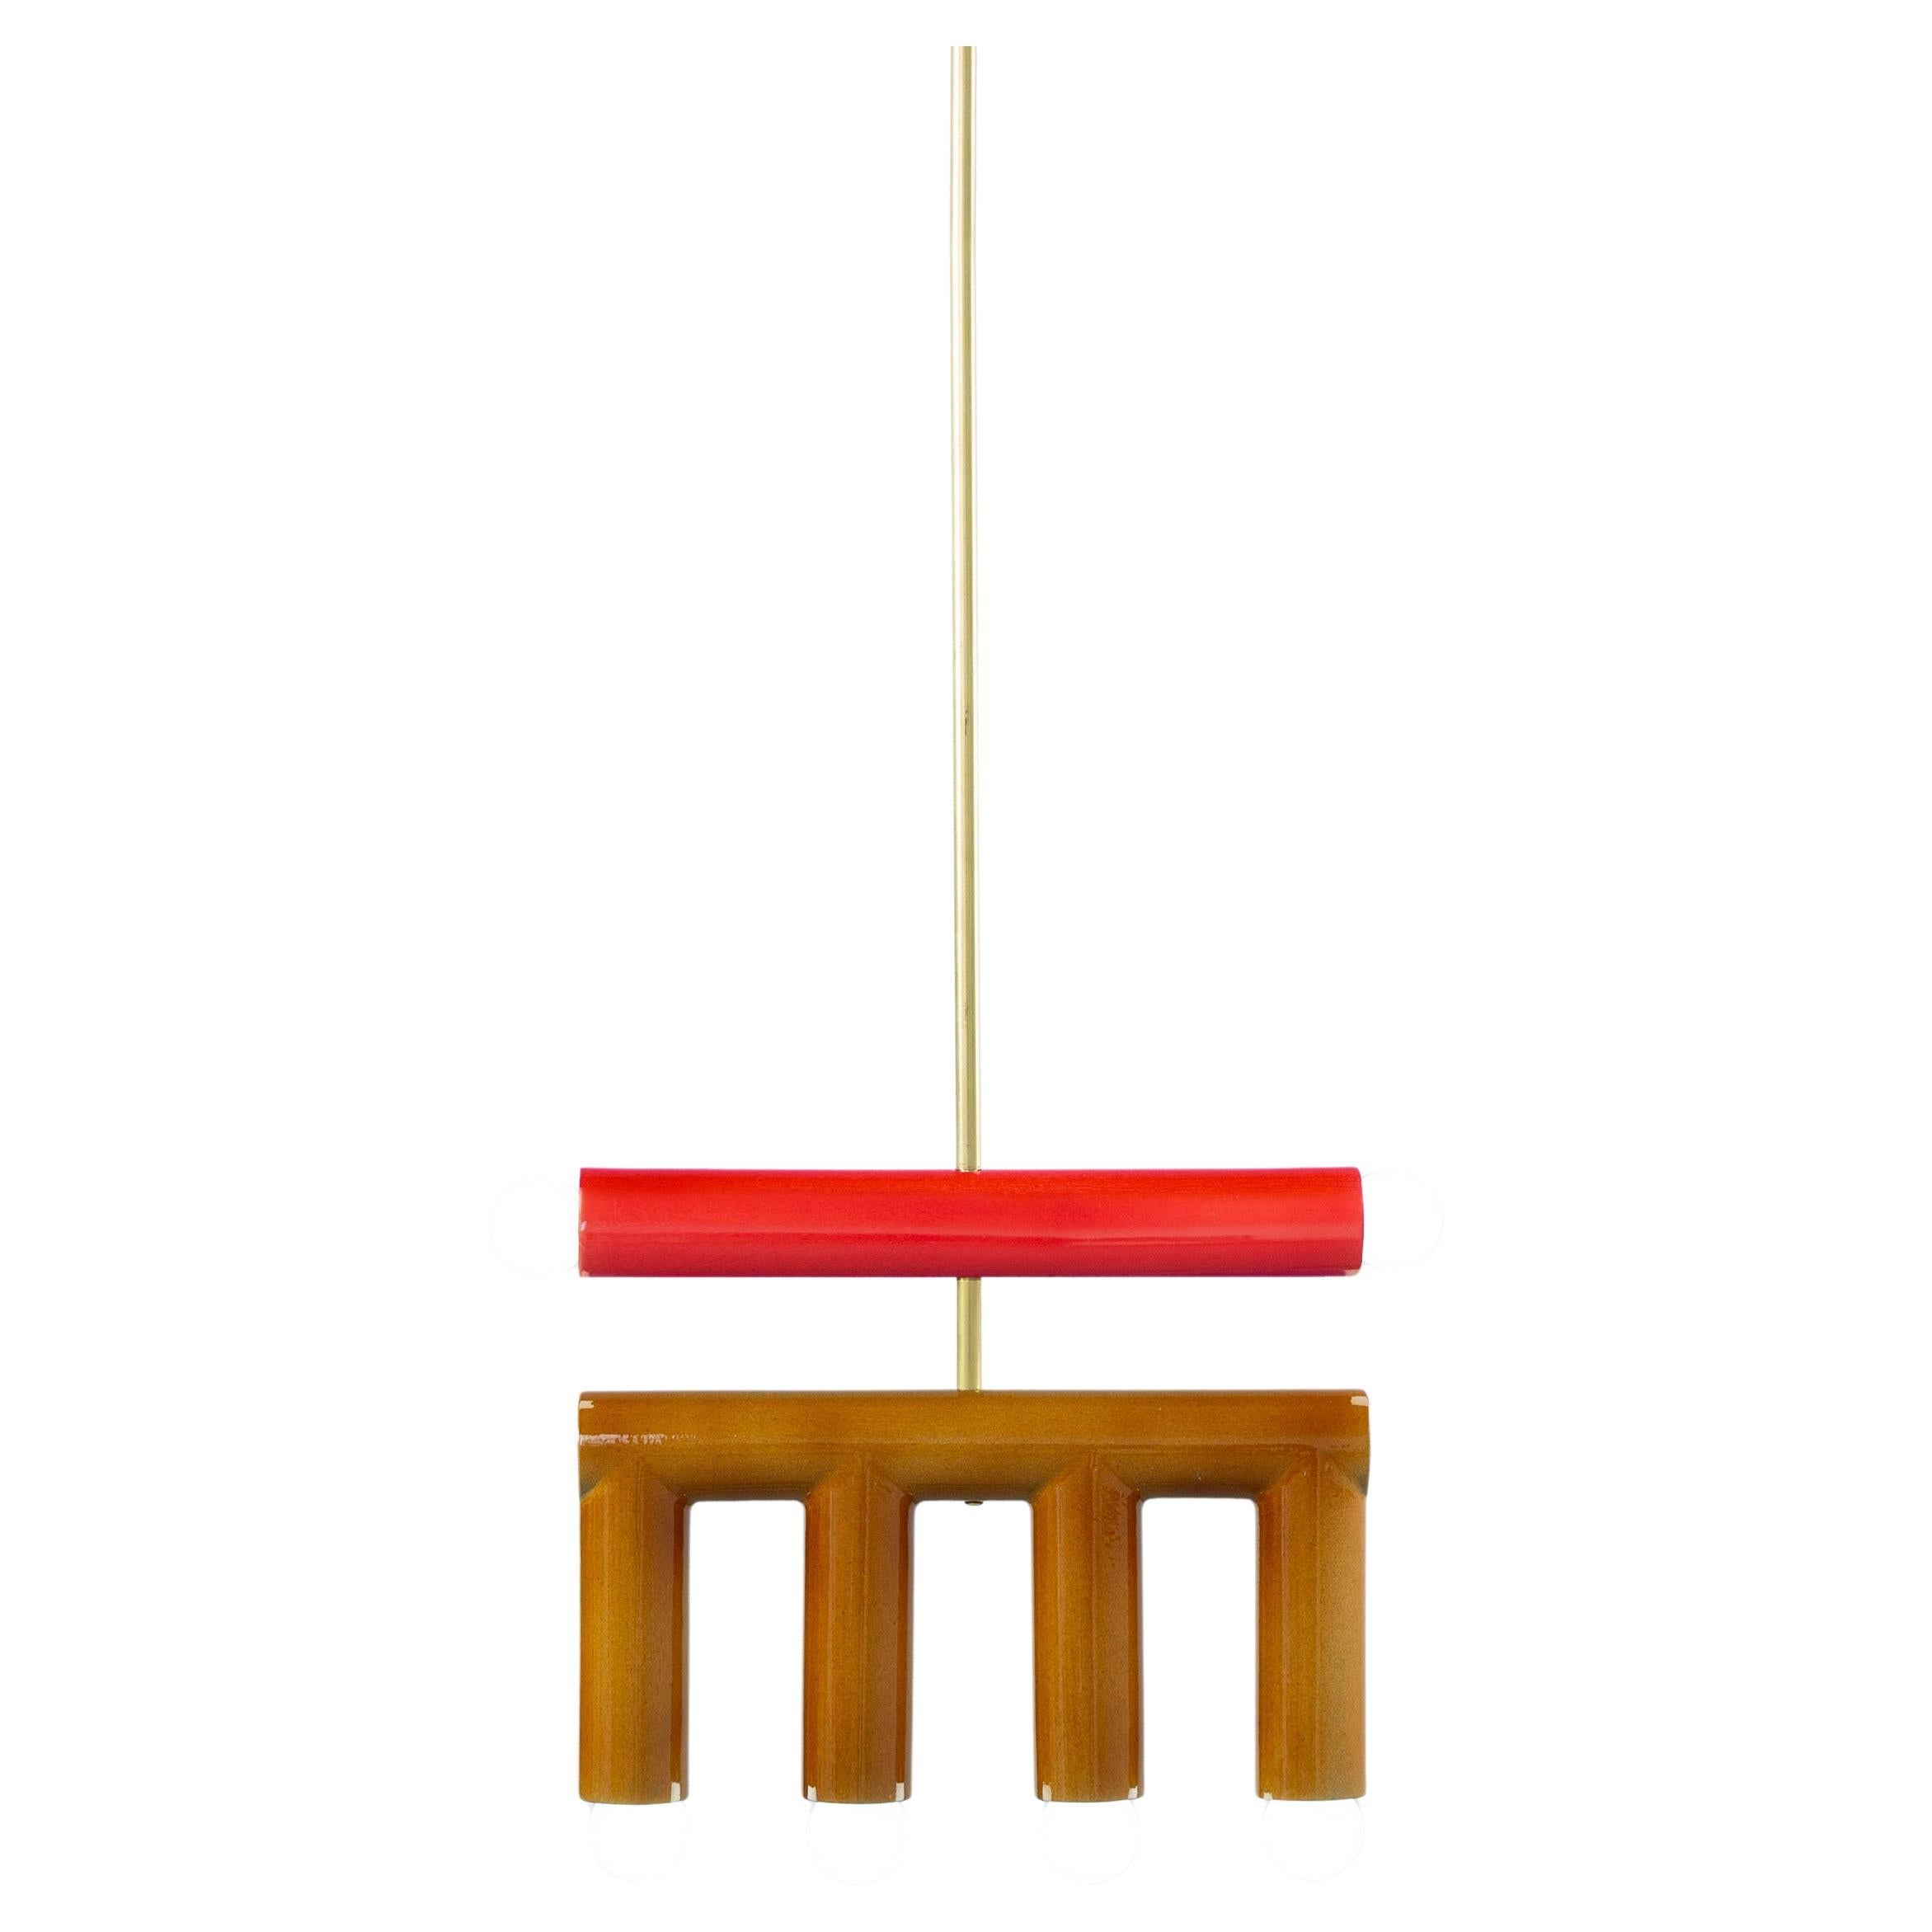 TRN D2 Pendant lamp / ceiling lamp / chandelier 
Designer: Pani Jurek

Model shown: Ochre, Red, Brass rod
Dimensions: H. 28 x 35 x 5 cm

Bulb (not included): E27/E26, compatible with US electric system

Materials: Hand glazed ceramic and brass
Rod: